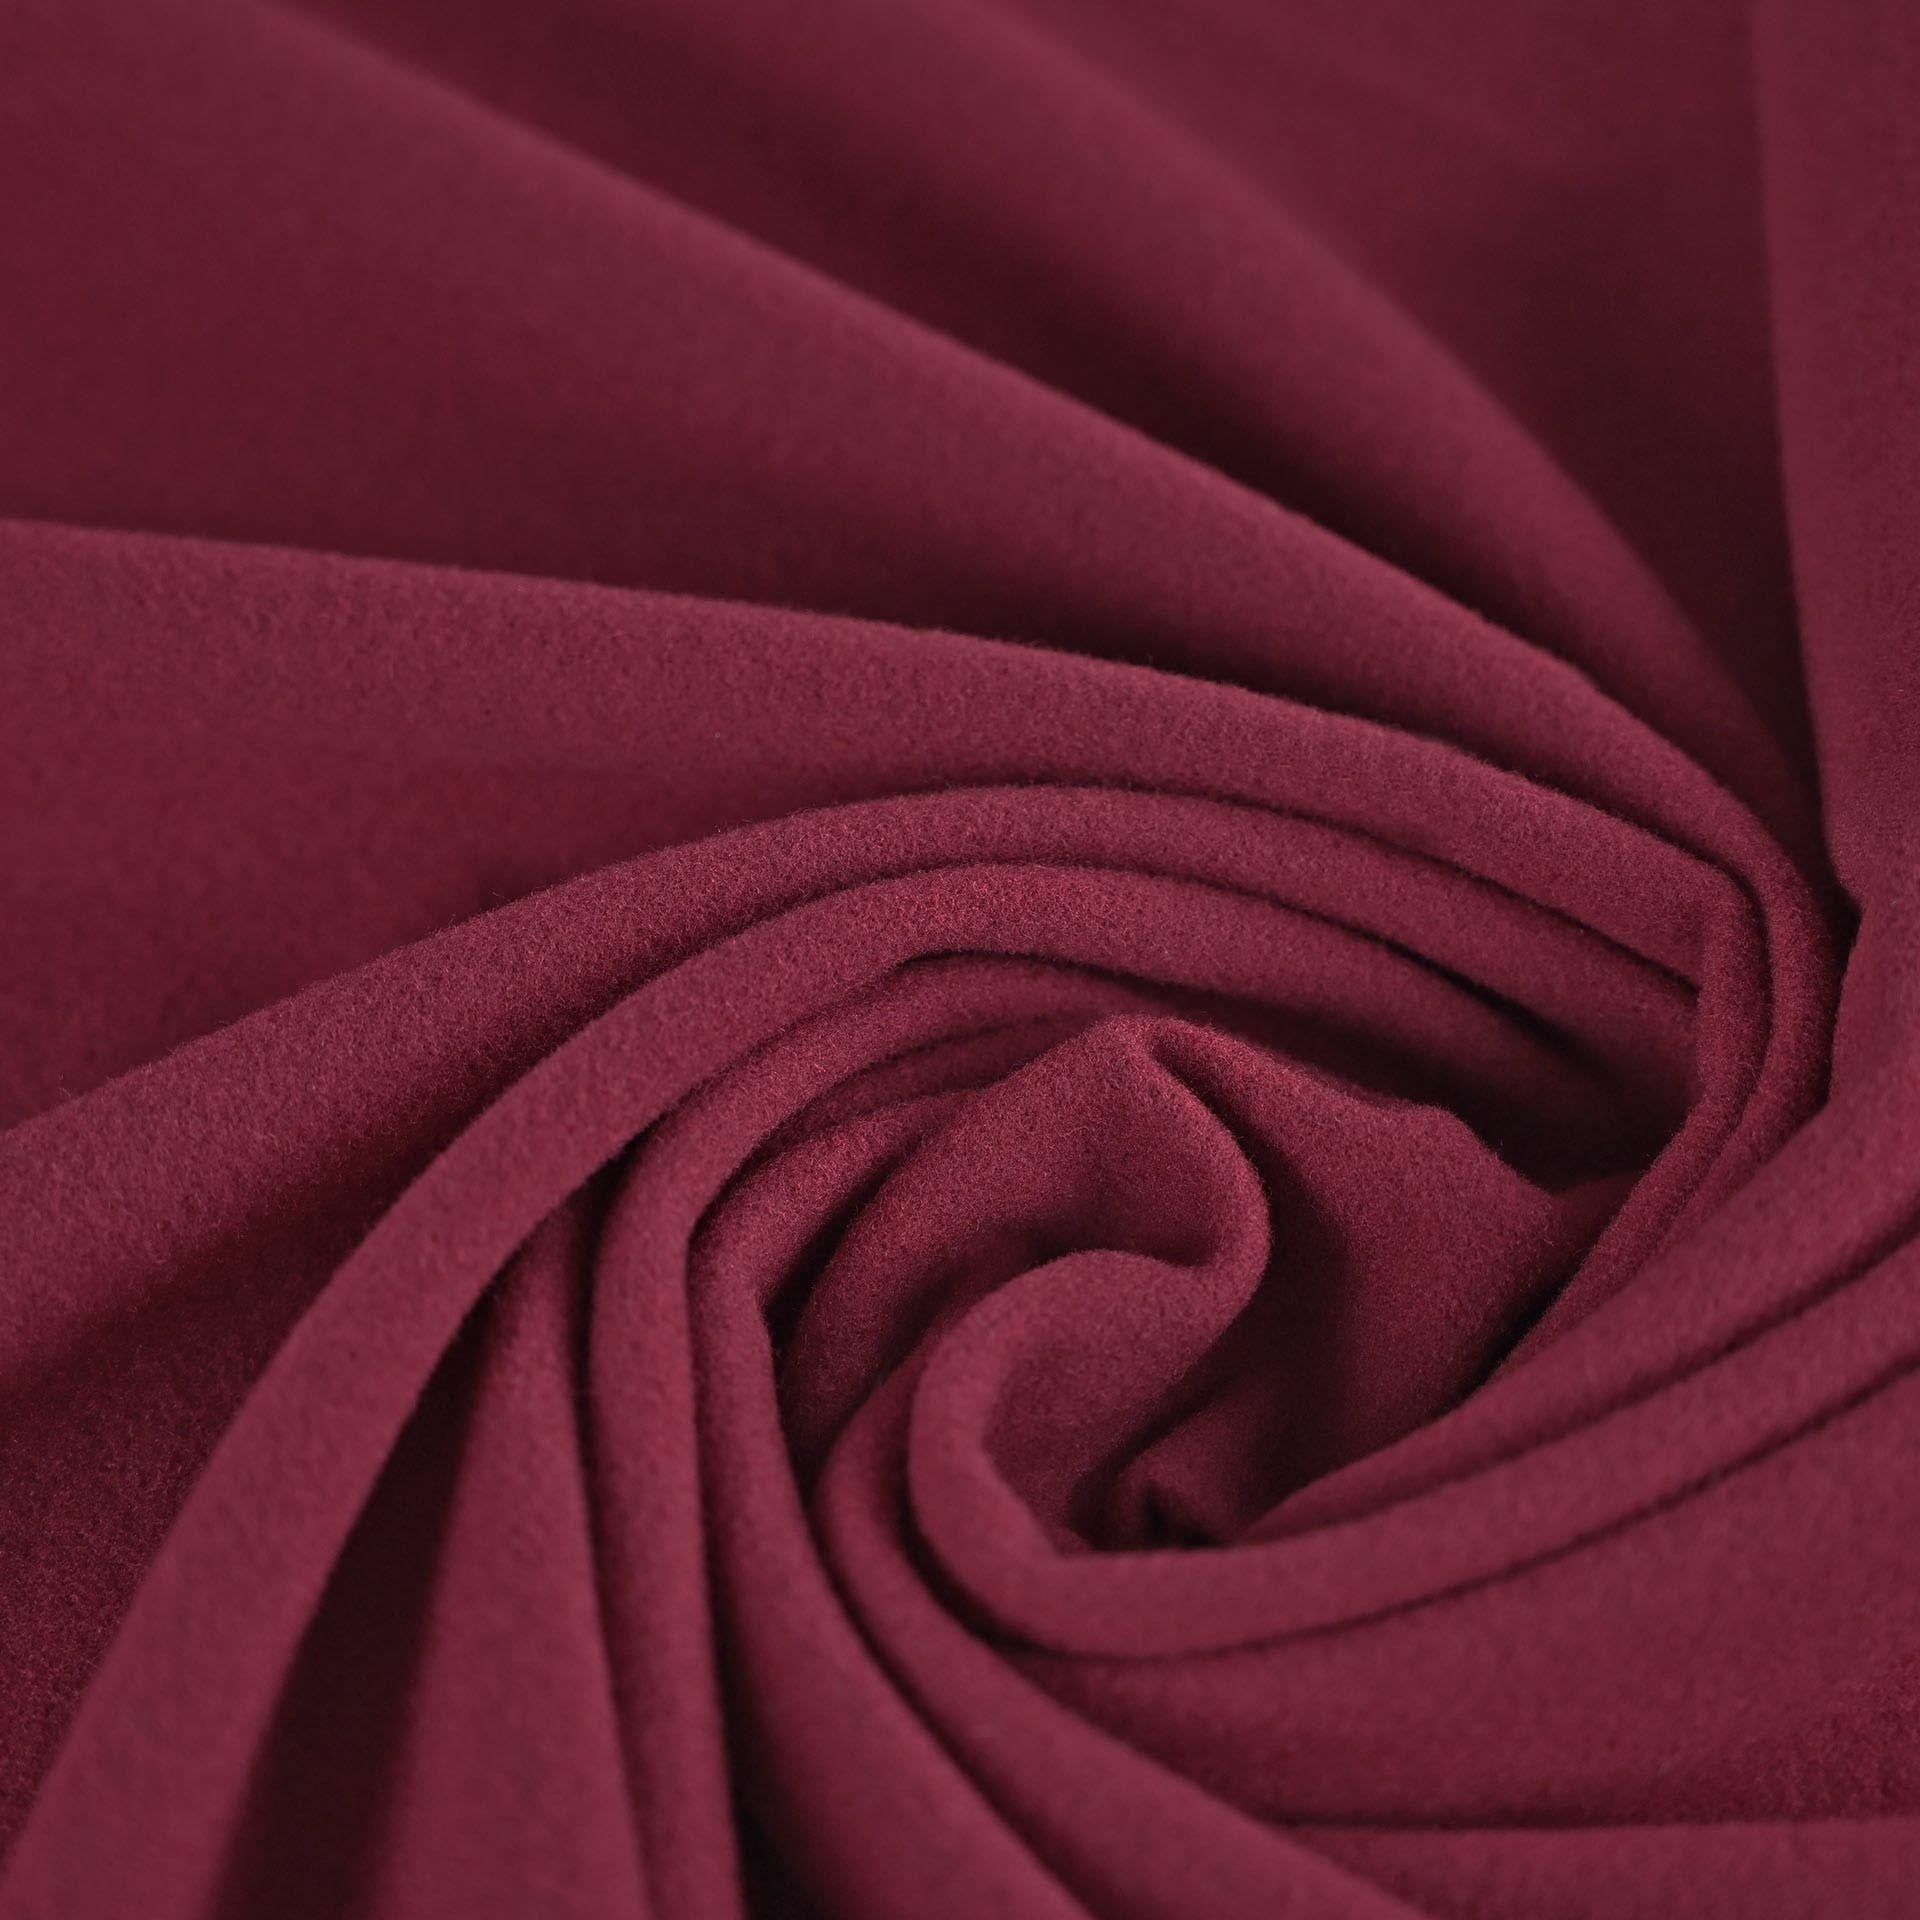 Polyester Wool Fabric Brushed Coating 59 inches Wide Soft By The Yard  Medium Heavy Weight (Magenta) 